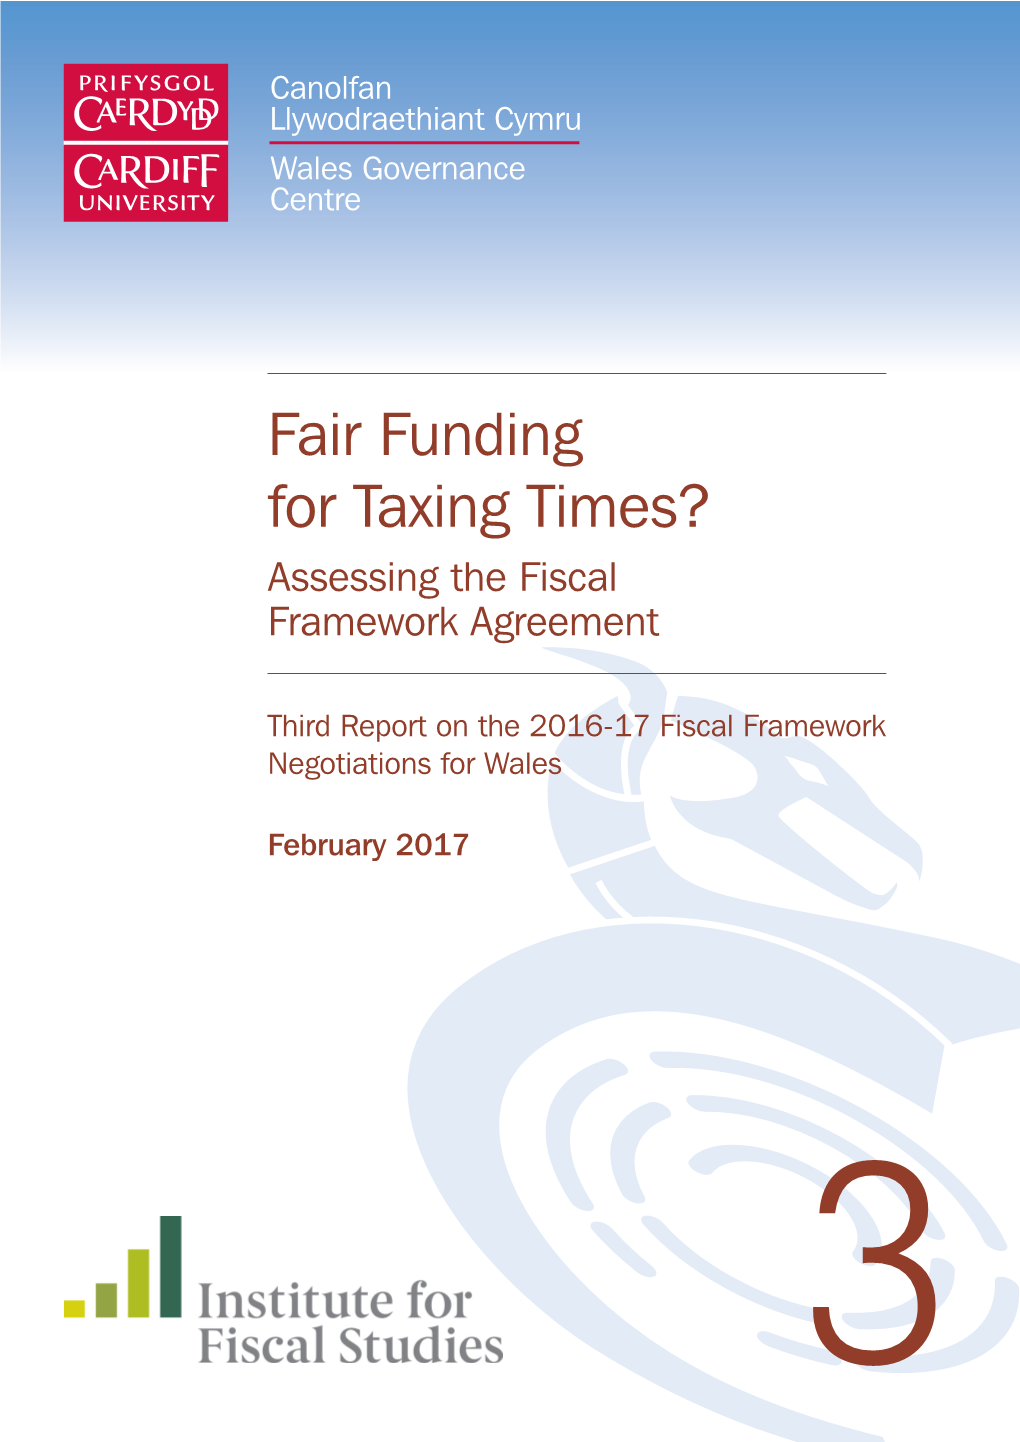 Fair Funding for Taxing Times? Assessing the Fiscal Framework Agreement